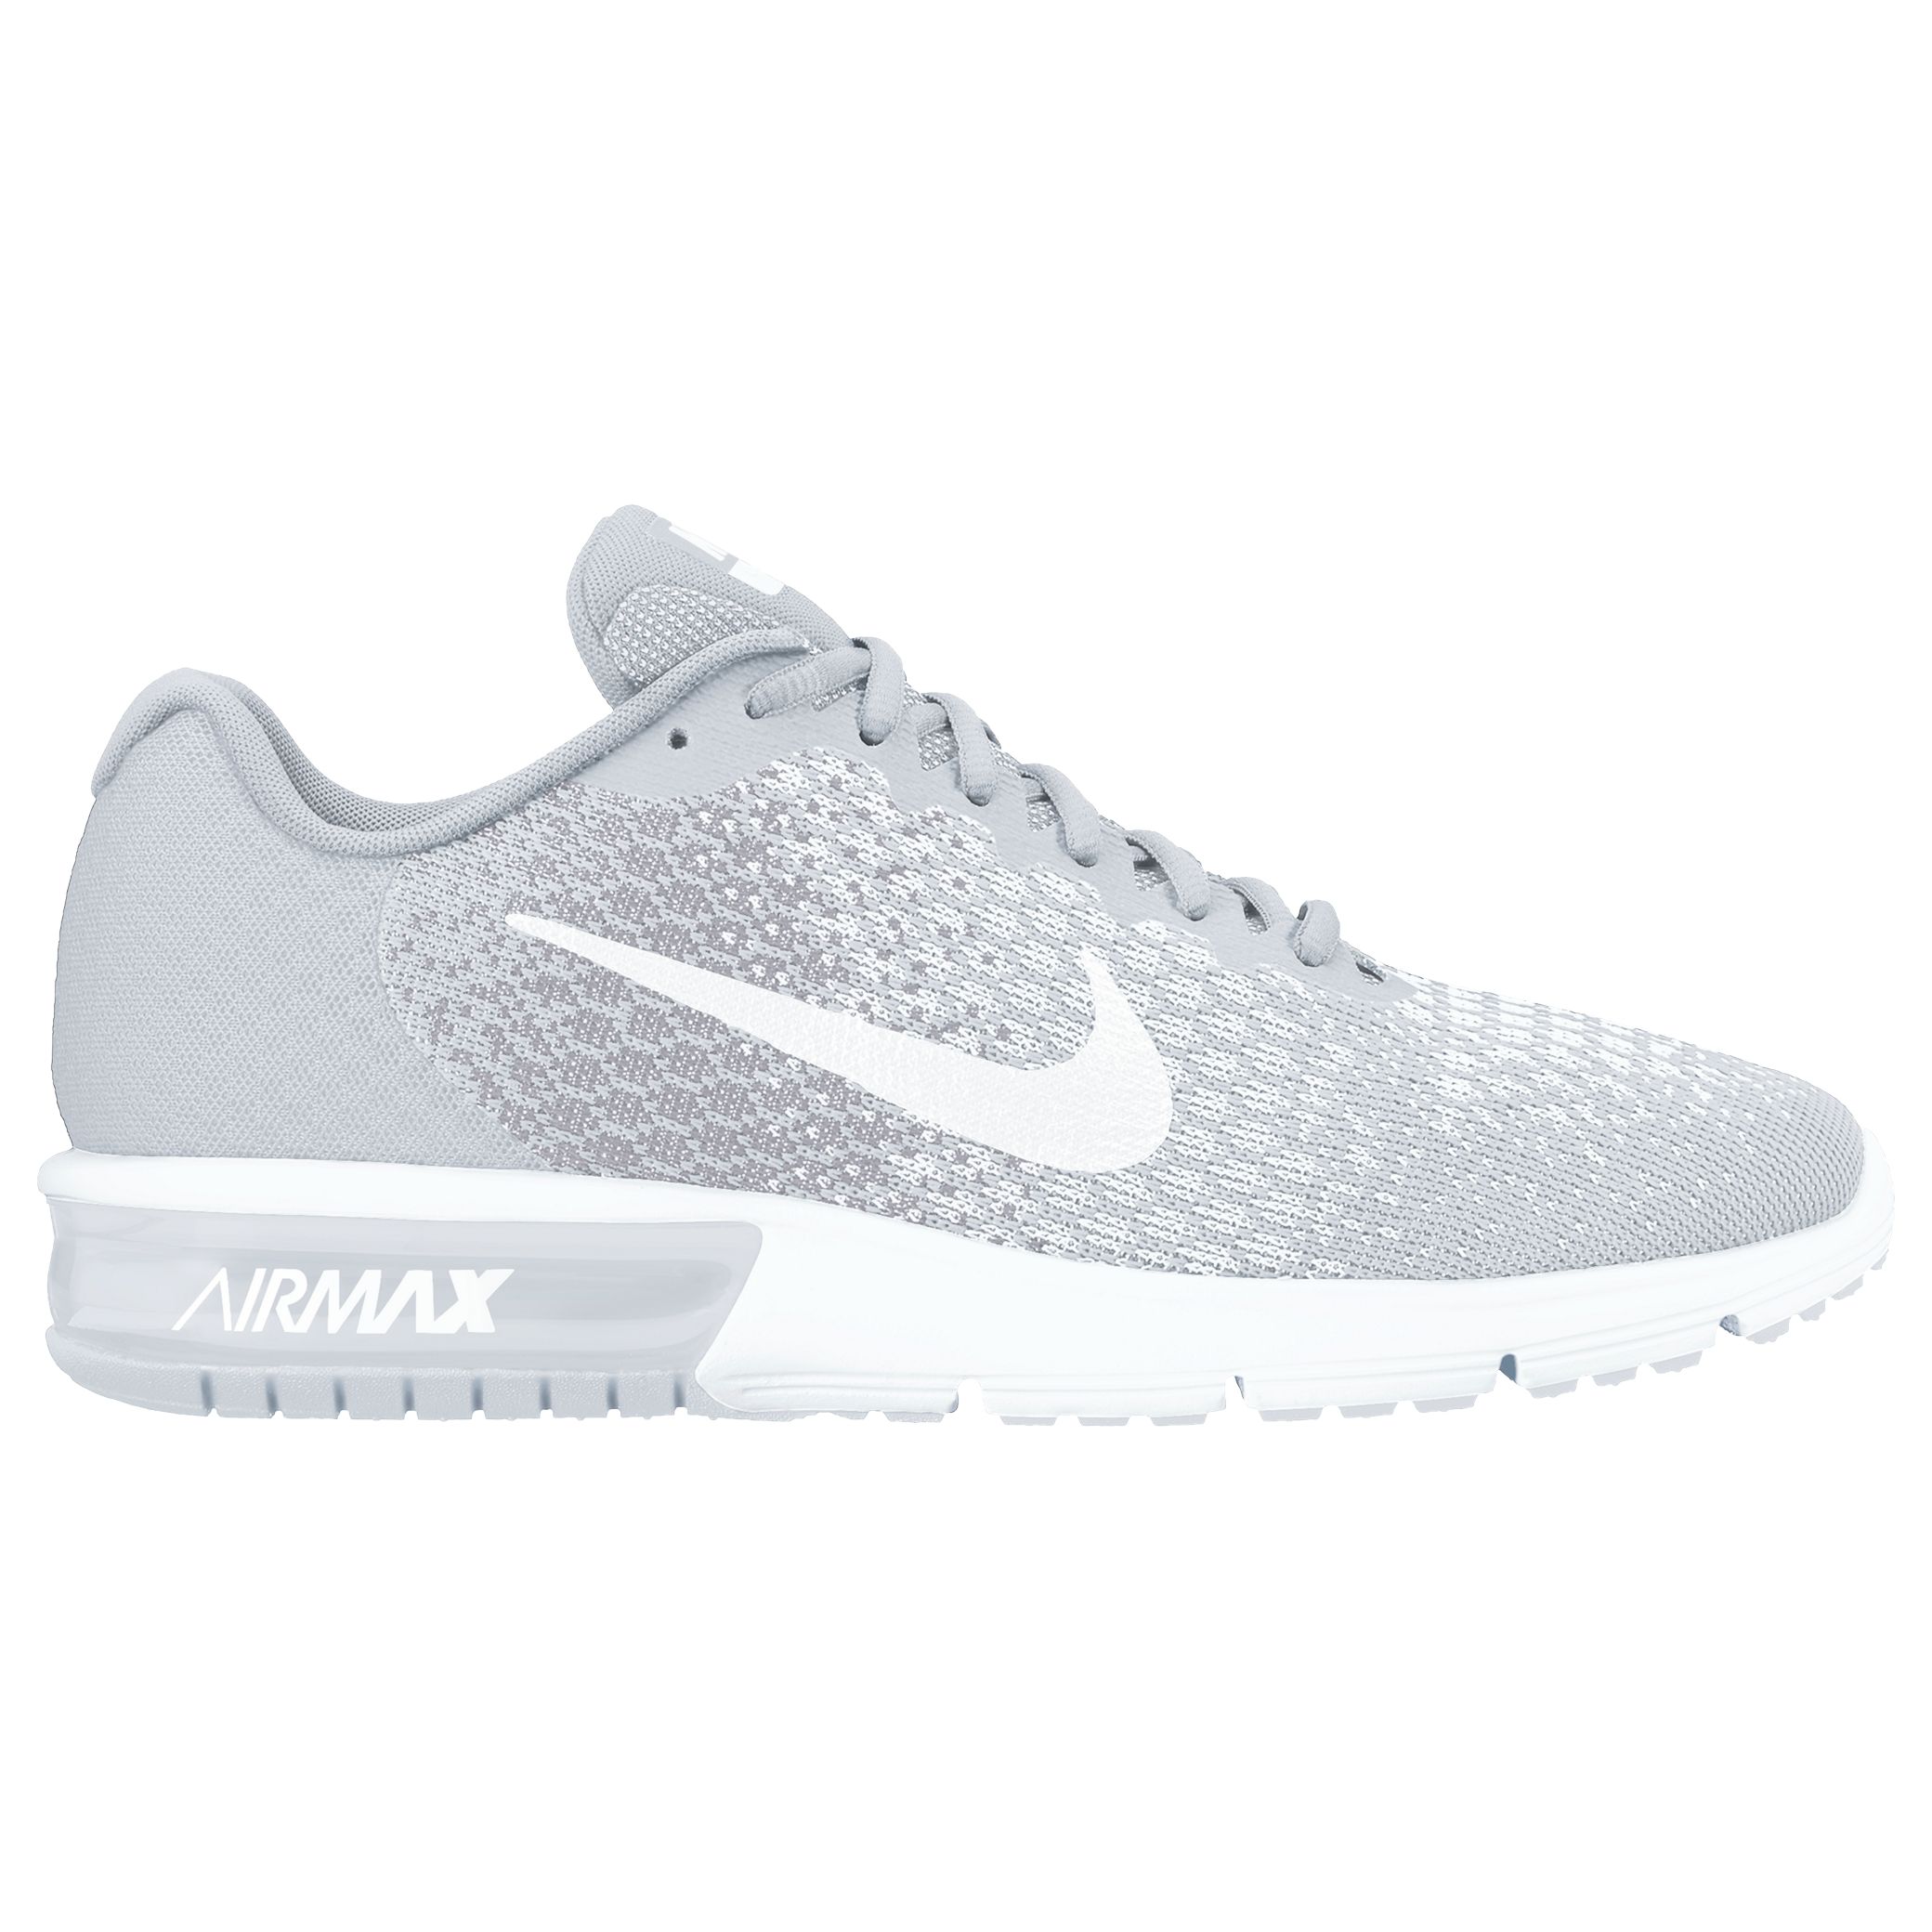 nike air max sequent 2 women's grey